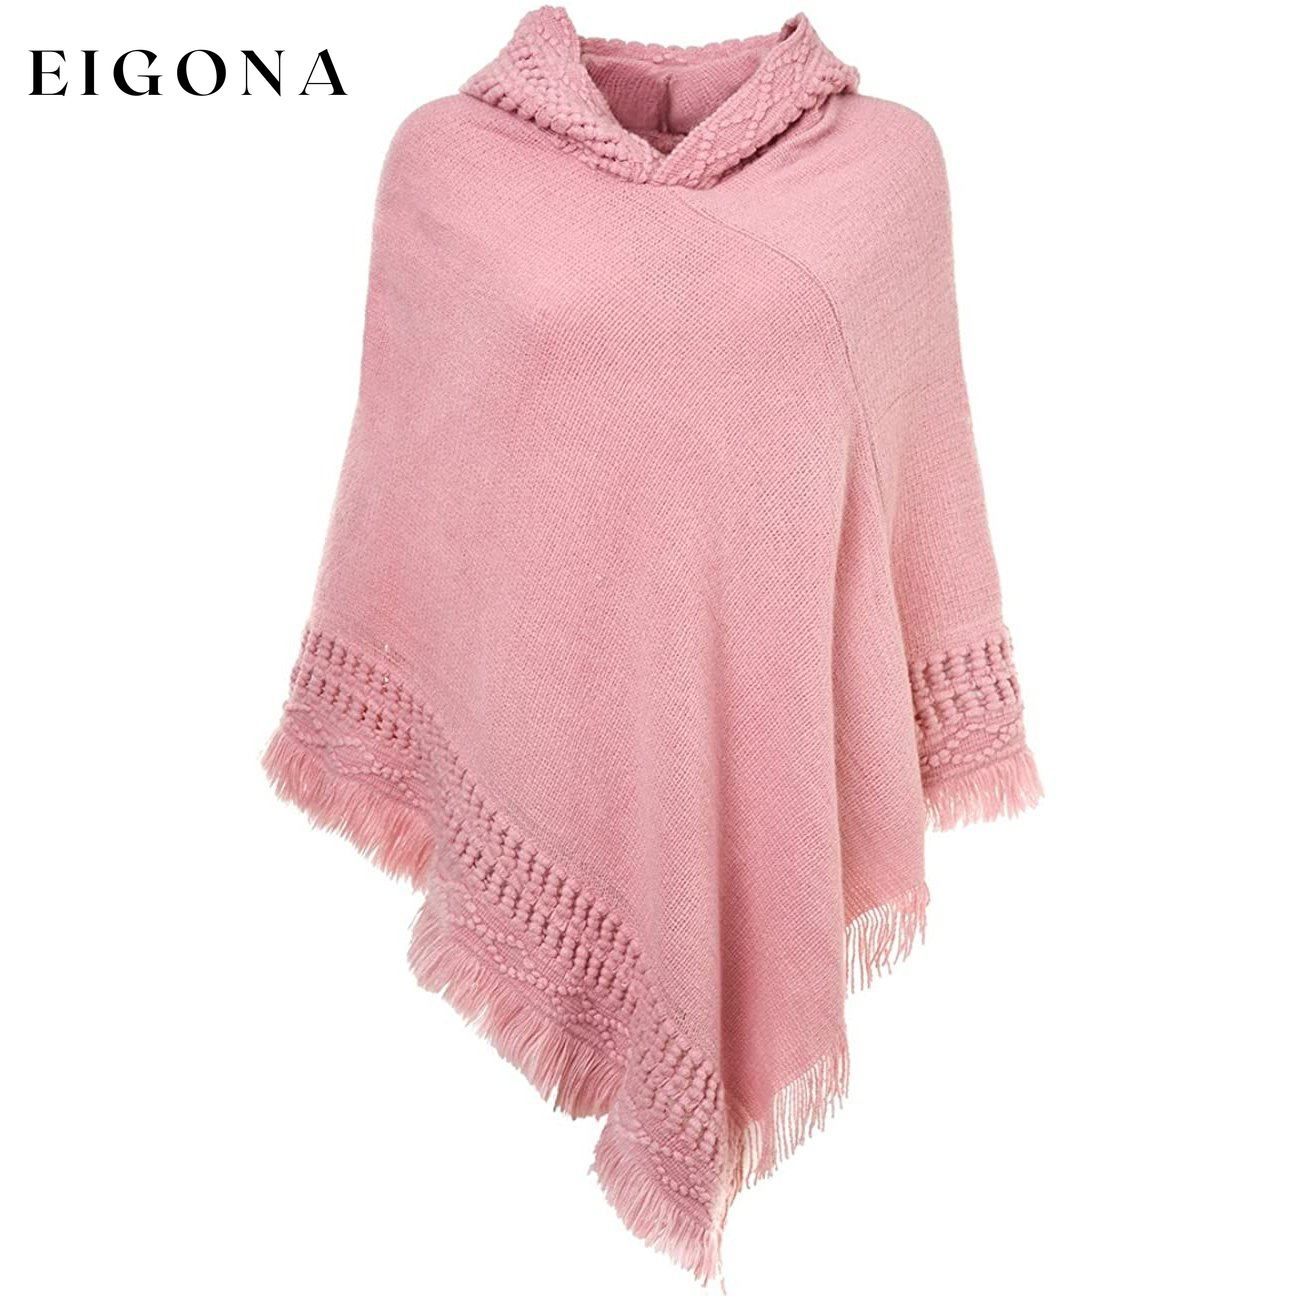 Womens Hooded Cape with Fringed Hem, Crochet Poncho Knitting Patterns Pink __stock:50 Jackets & Coats refund_fee:1200